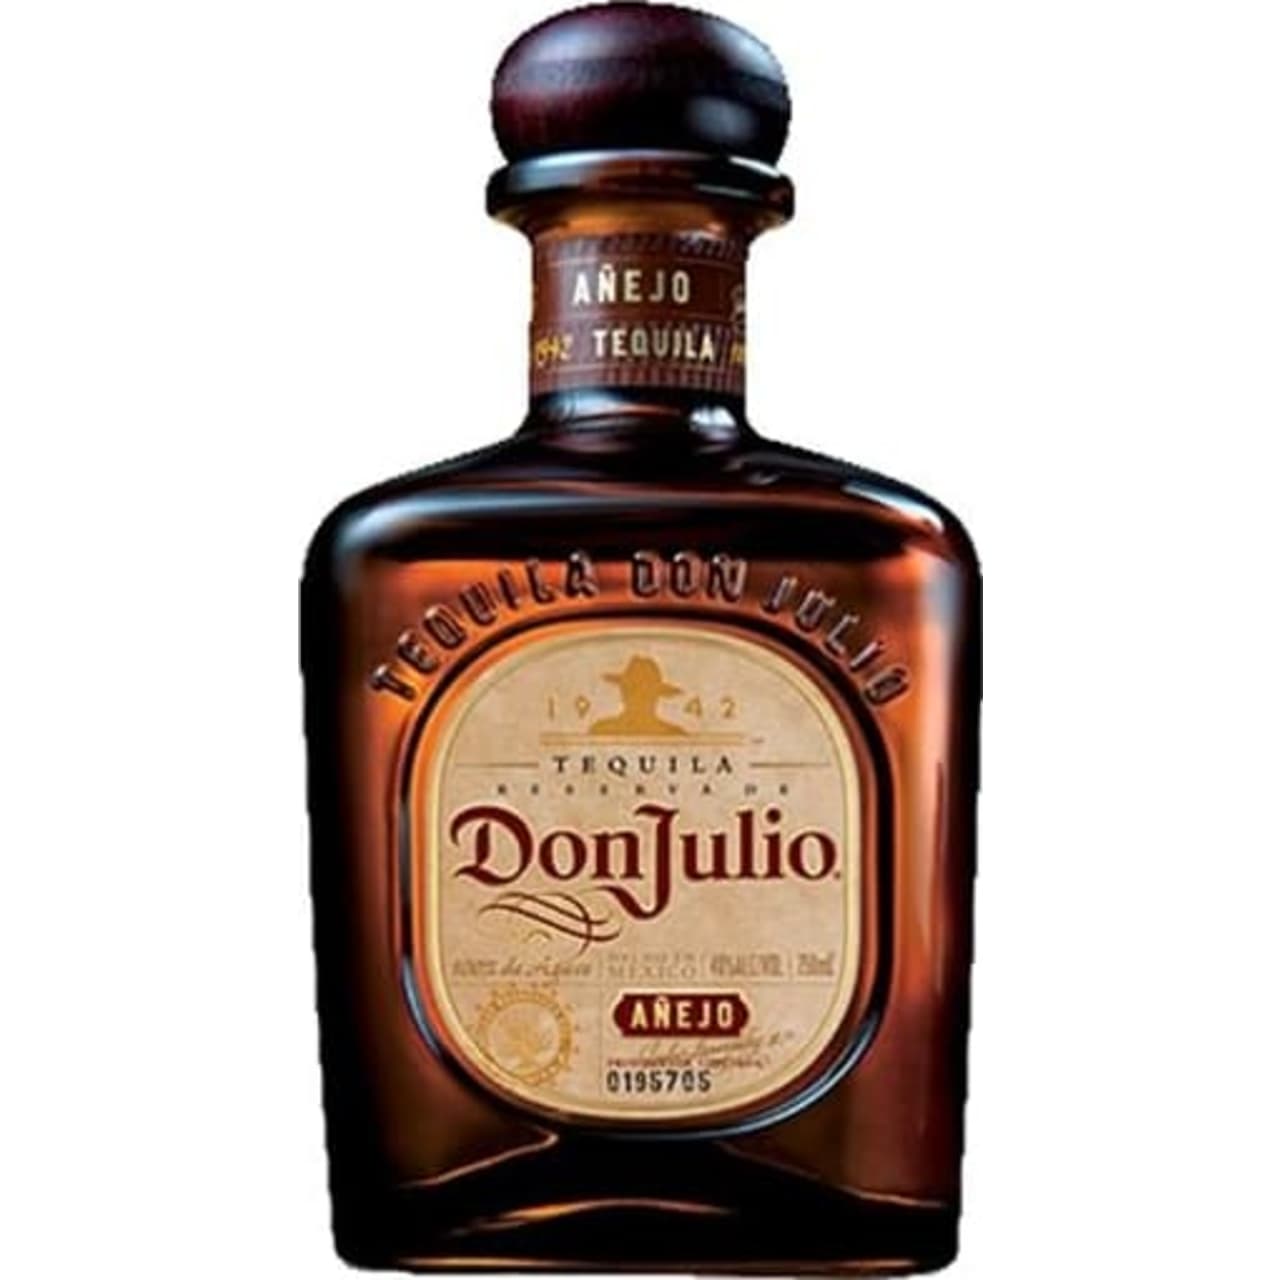 Rich, distinctive and wonderfully complex, its flavor strikes the perfect balance between agave, wood and hints of vanilla.